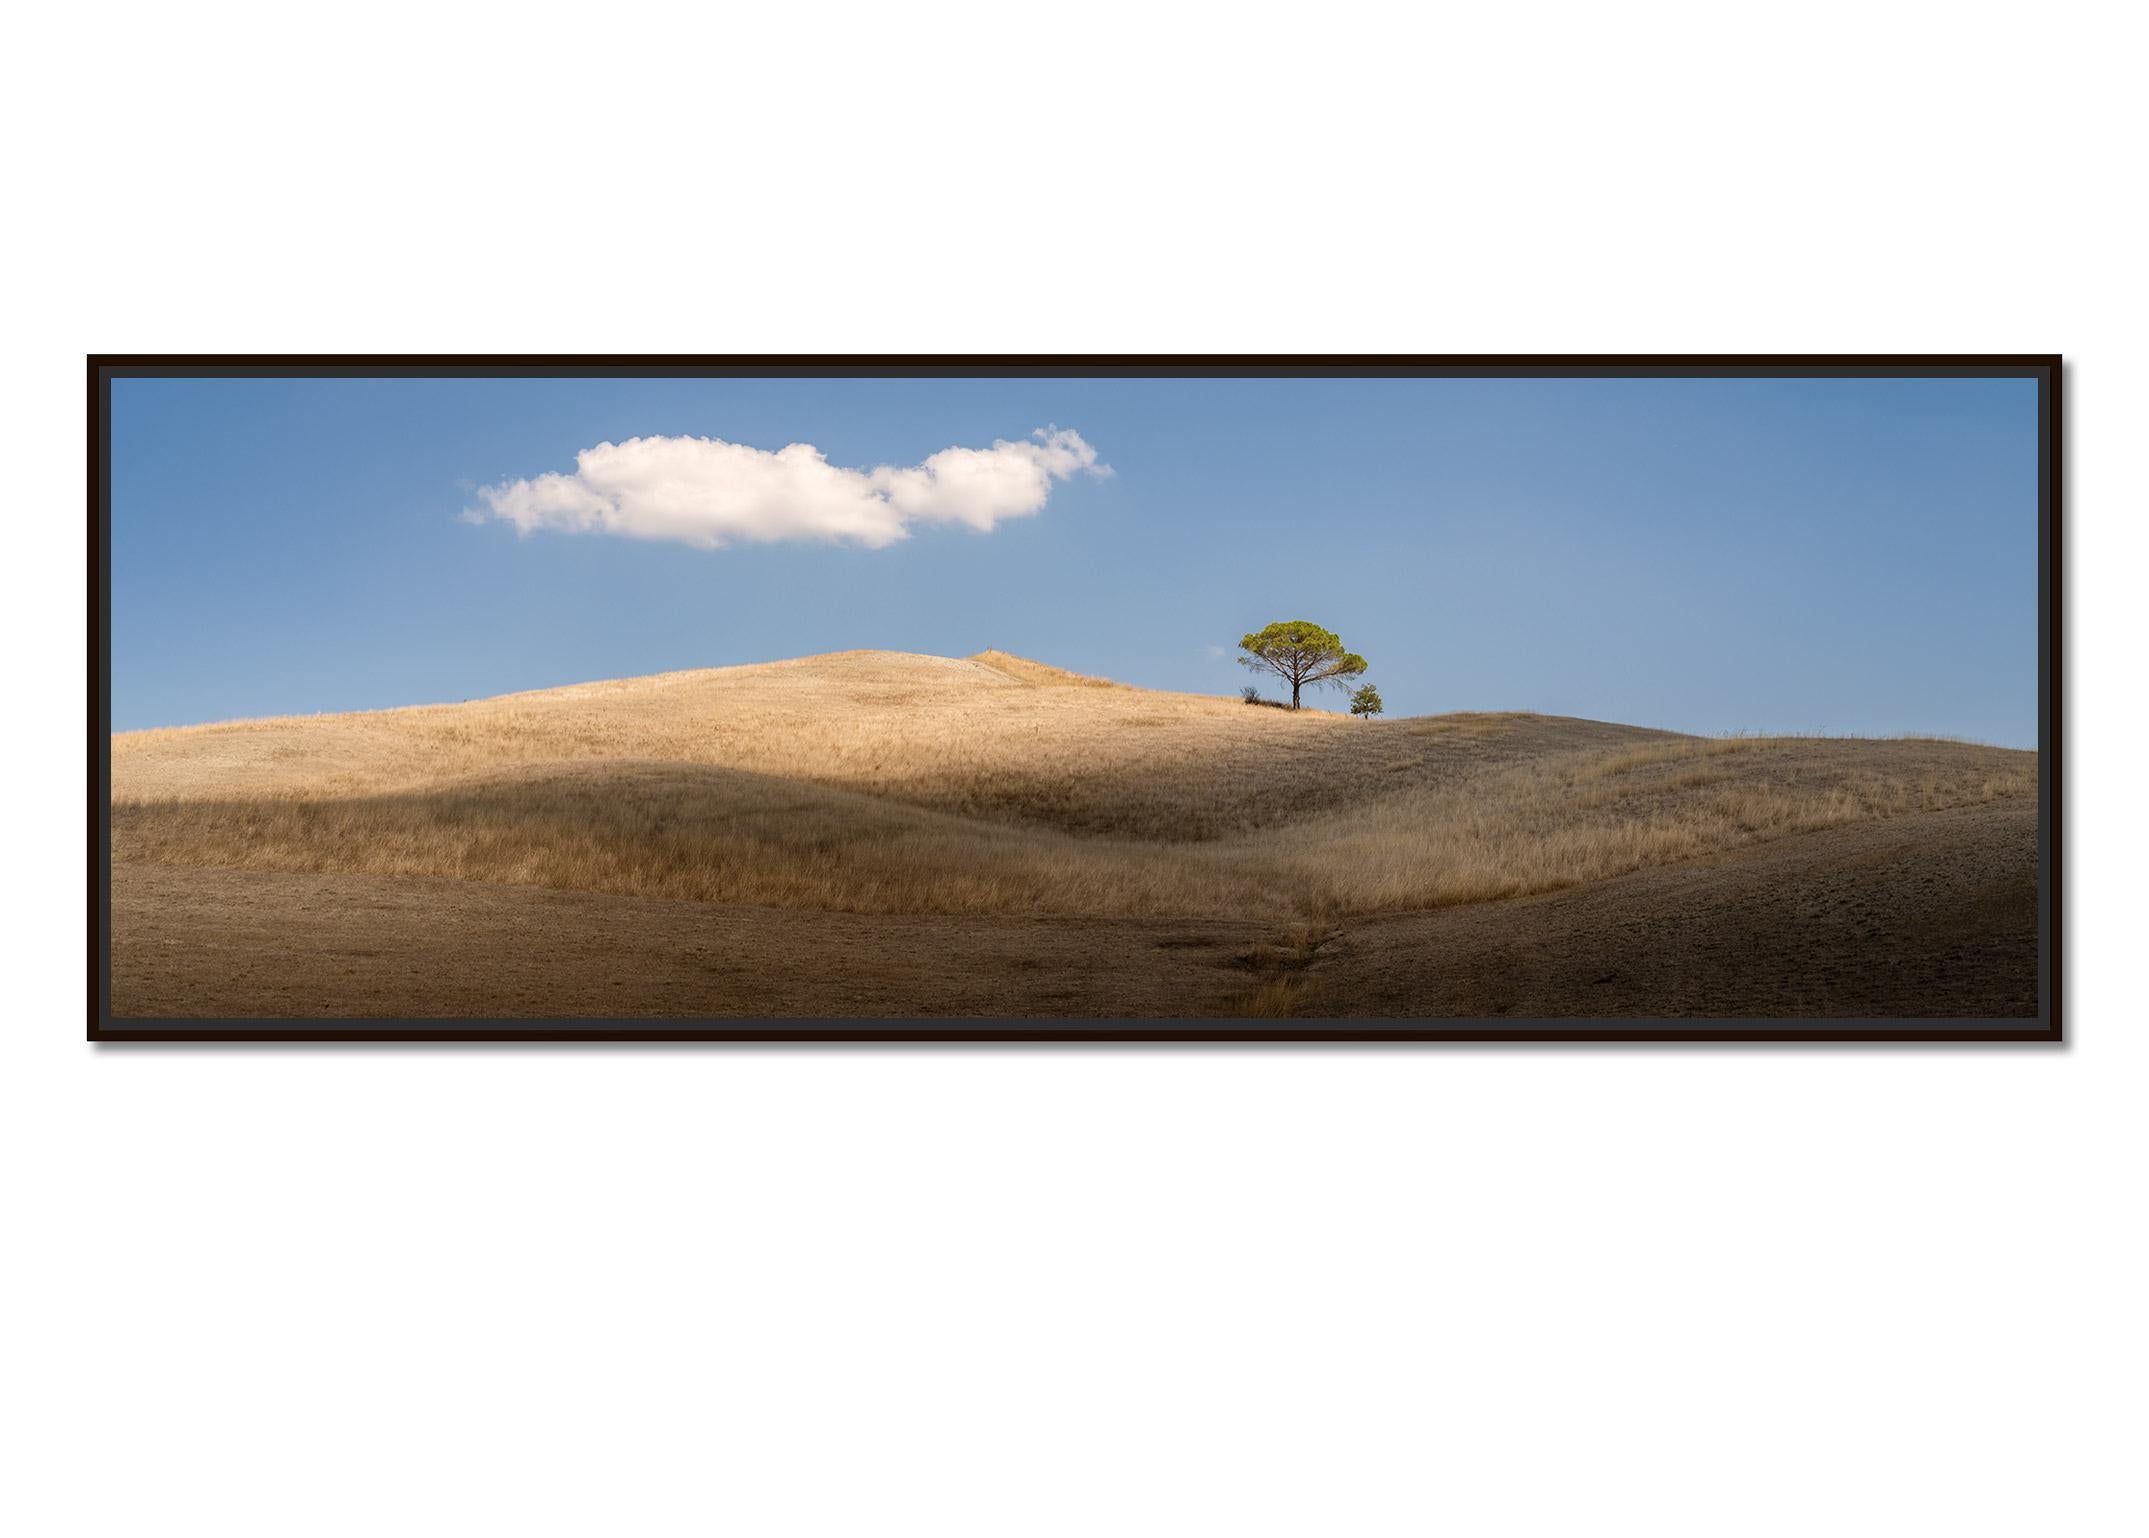 Italian Stone Pines, Tuscany, Italy, colour fine art image print, landscape - Photograph by Gerald Berghammer